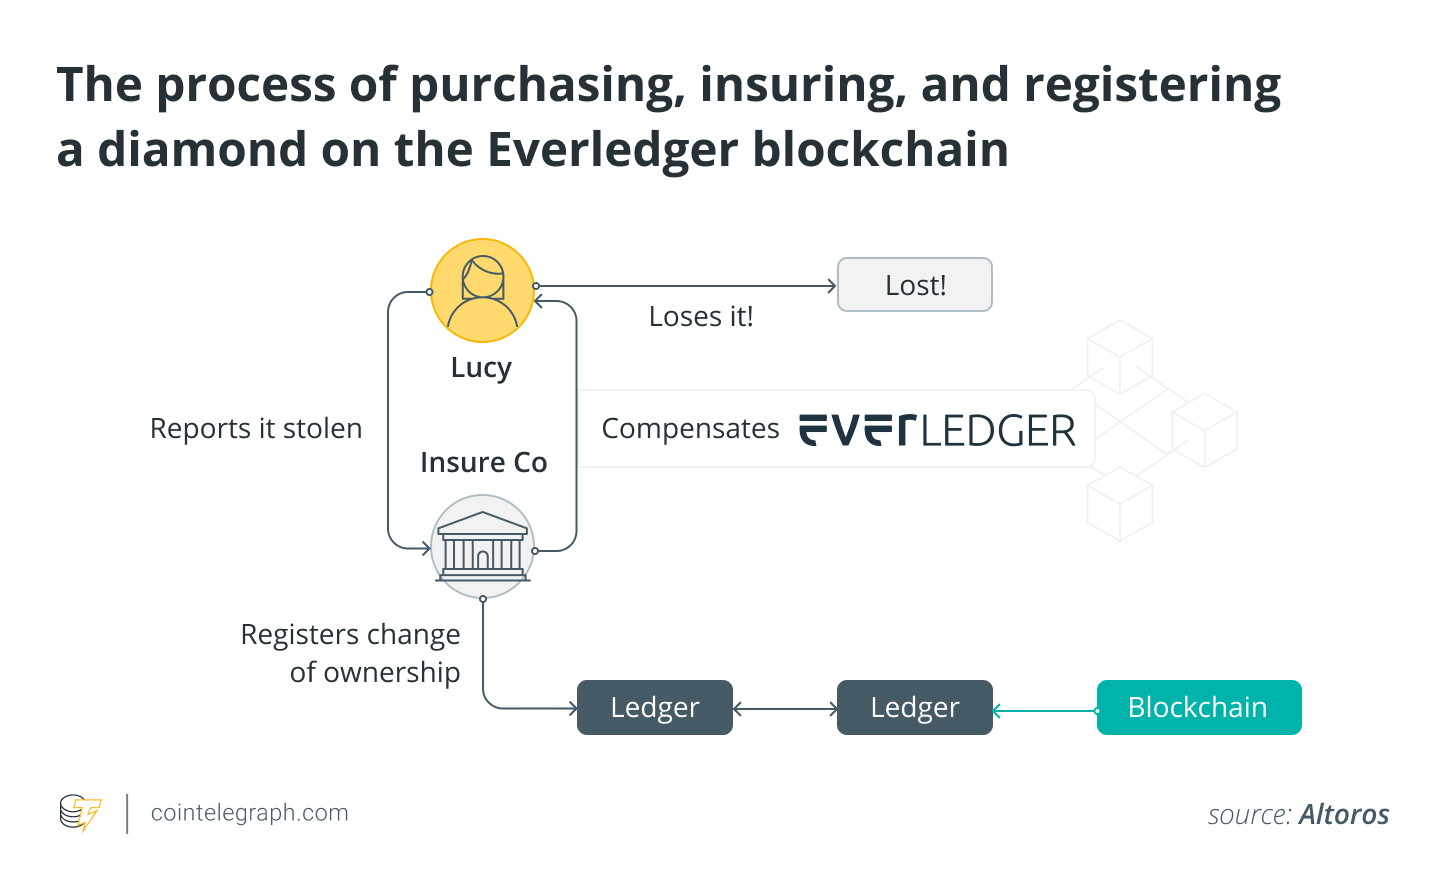 The process of purchasing insuring and registering a diamond on the Everledger blockchain